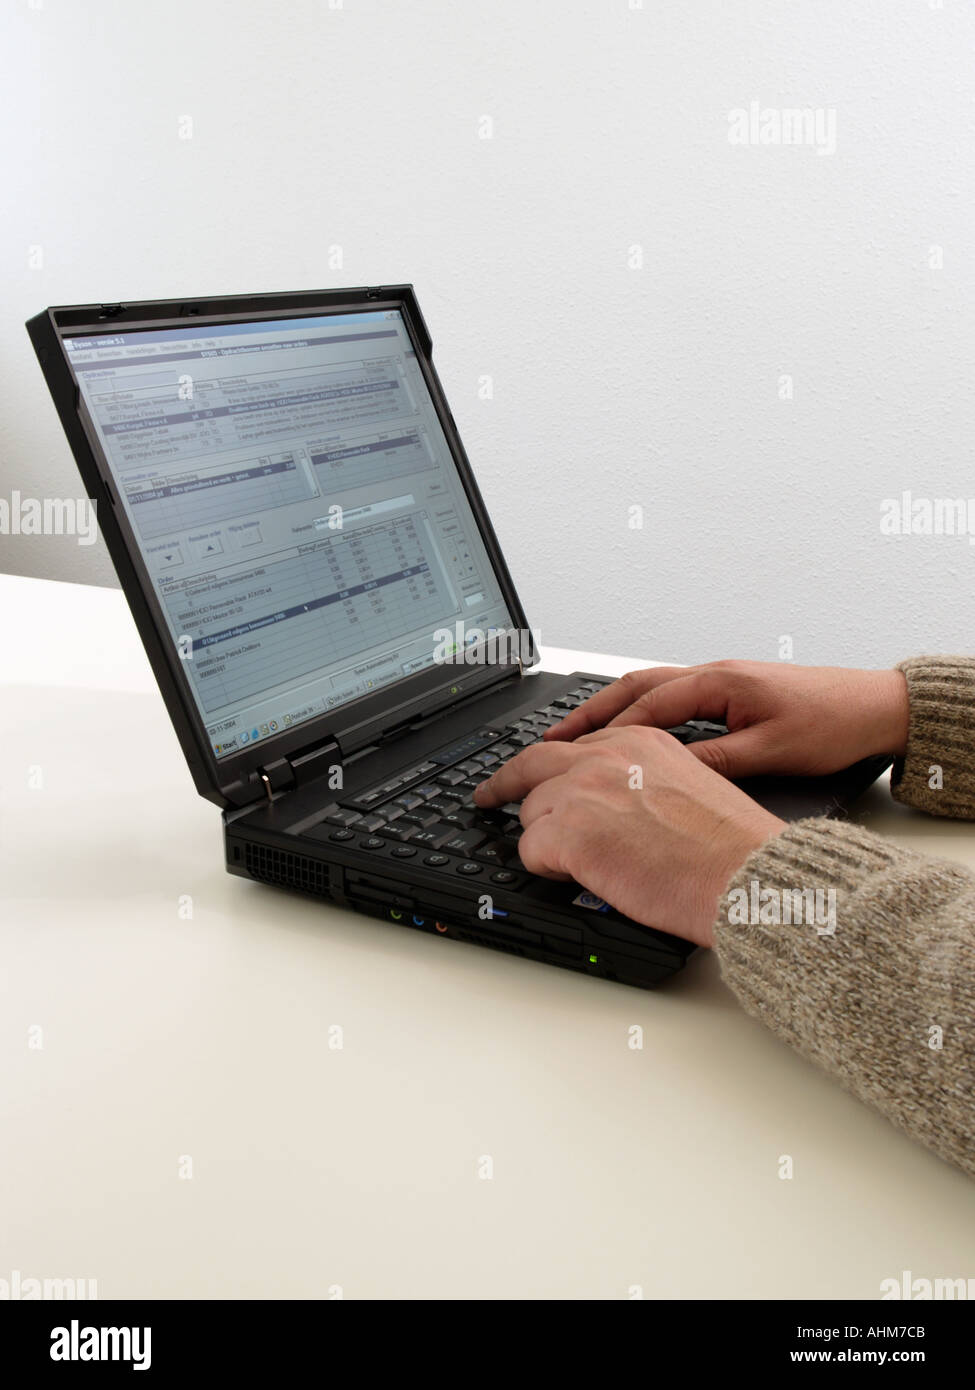 Hands of a man typing on a IBM laptop computer with office software on screen Stock Photo